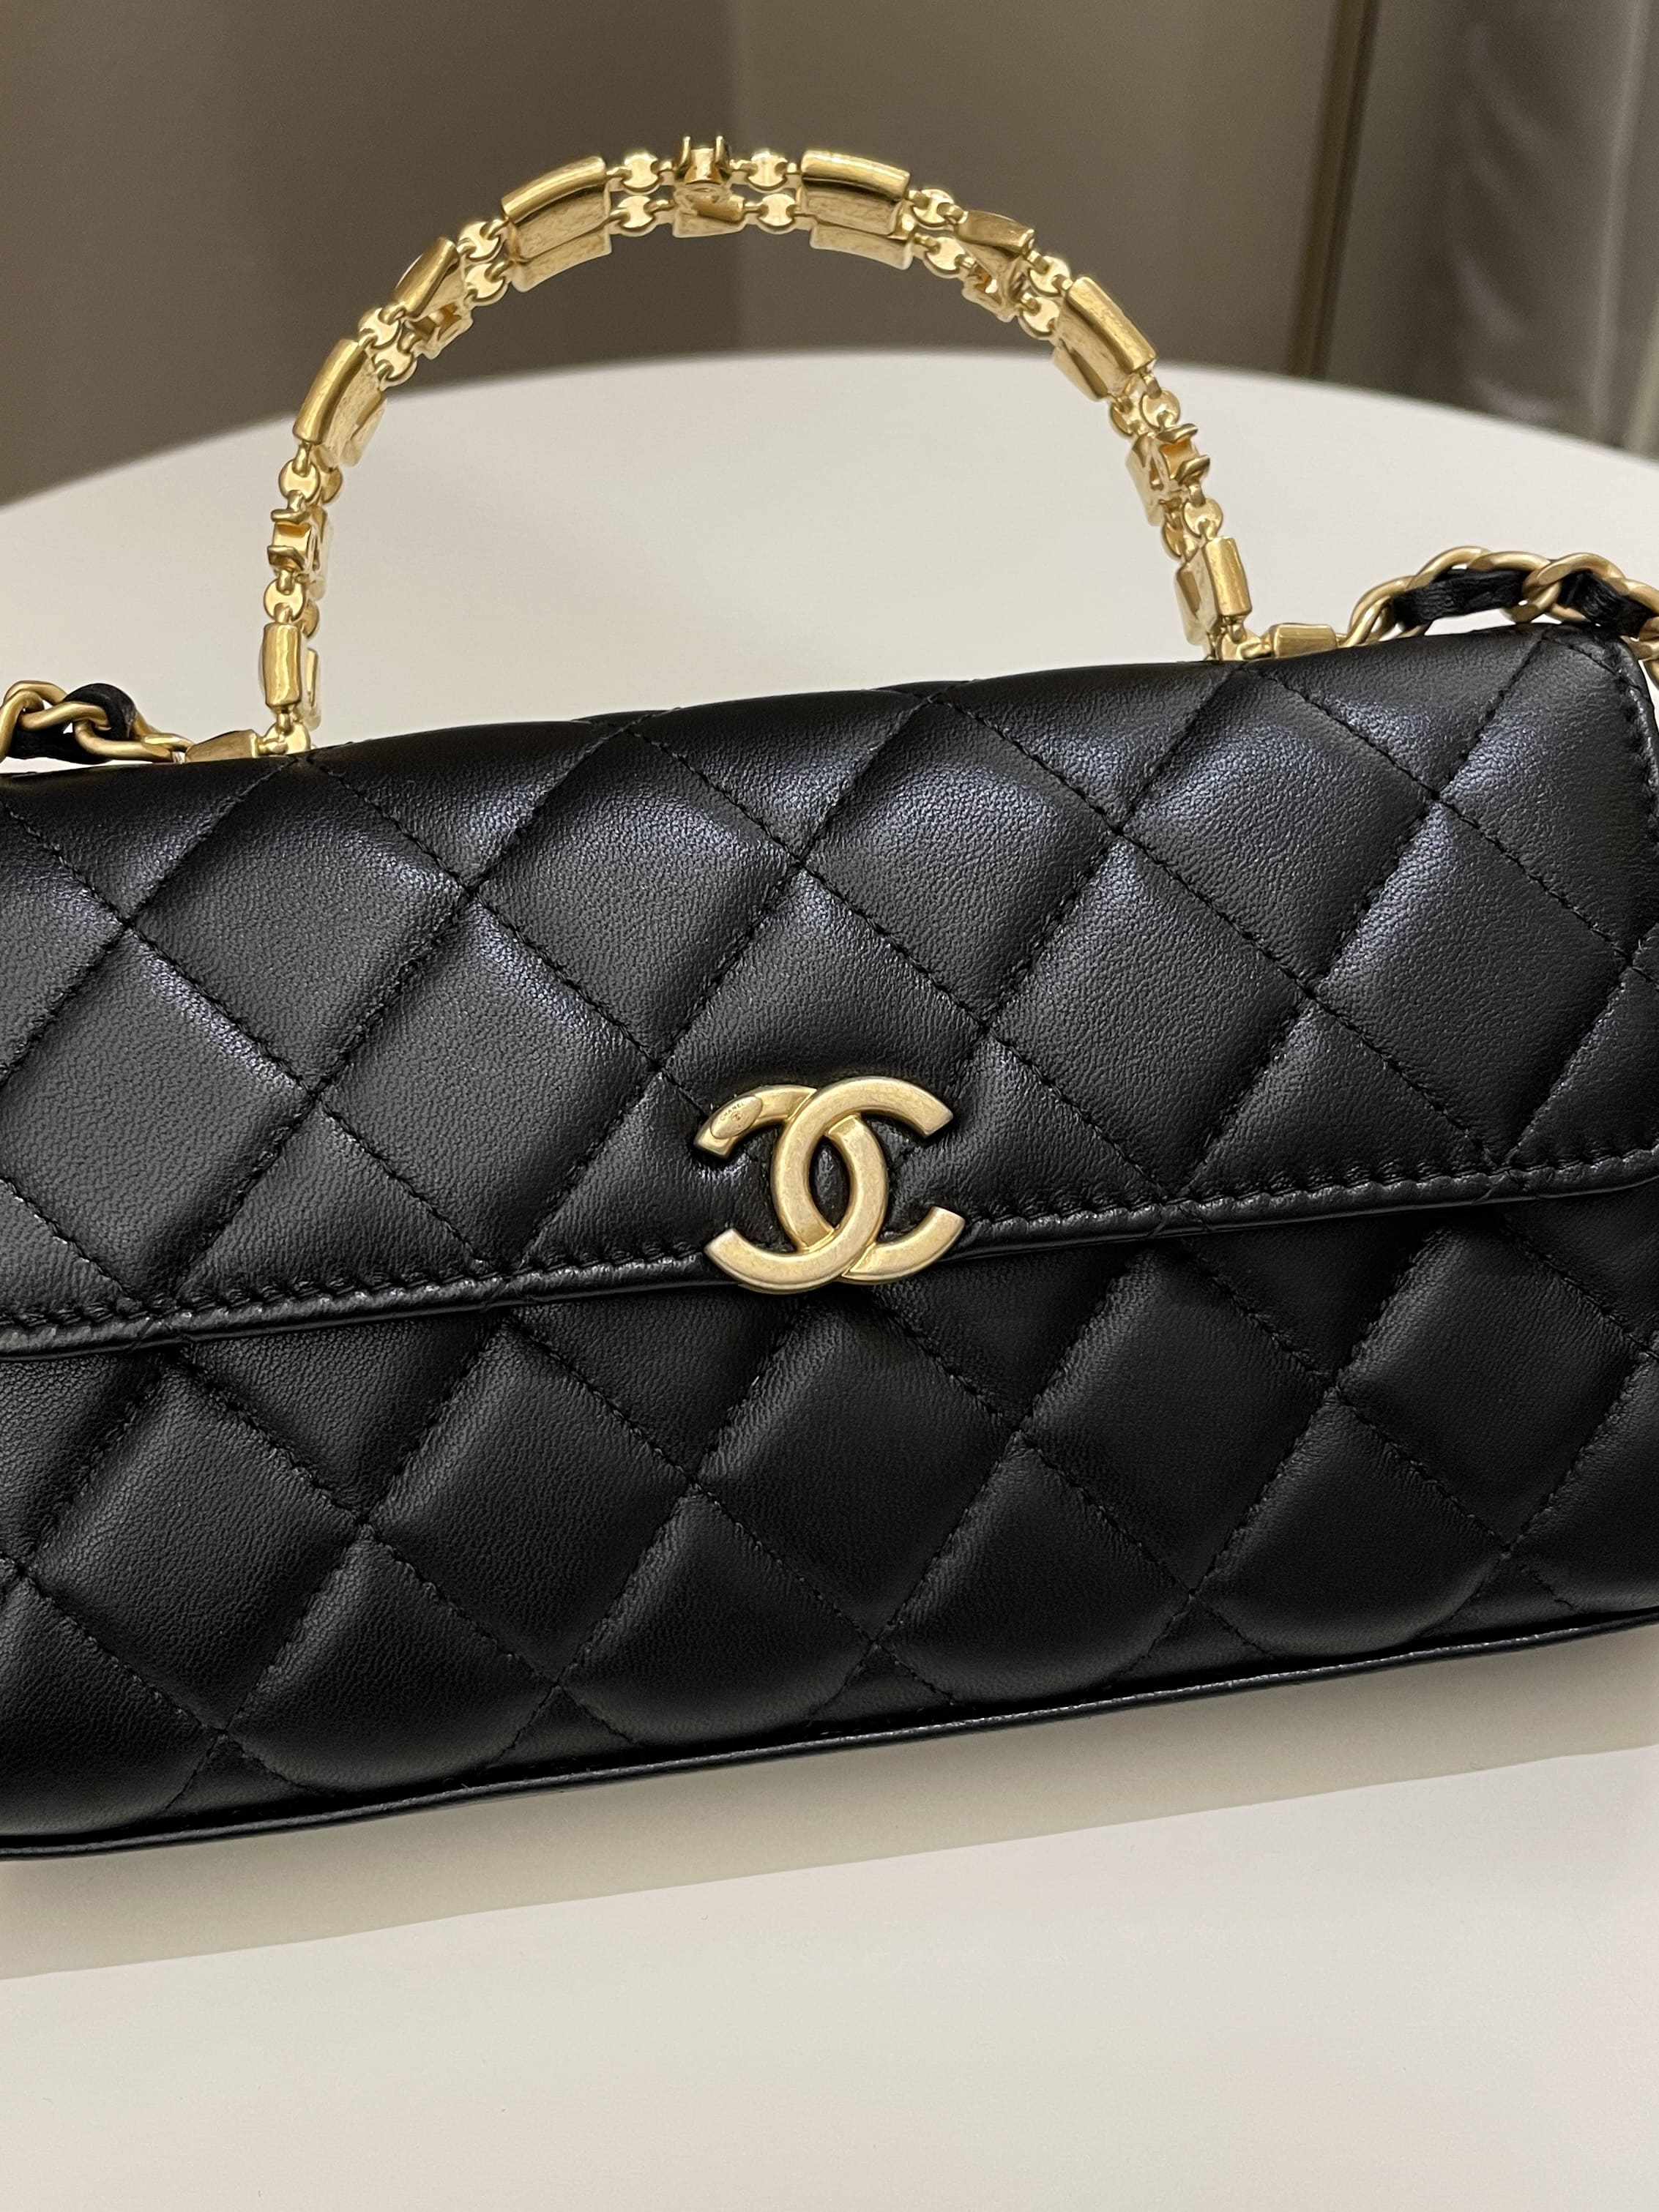 CHANEL Black 22B Lambskin Quilted Handle Flap Turnlock Chain Top Crossbody  Bag